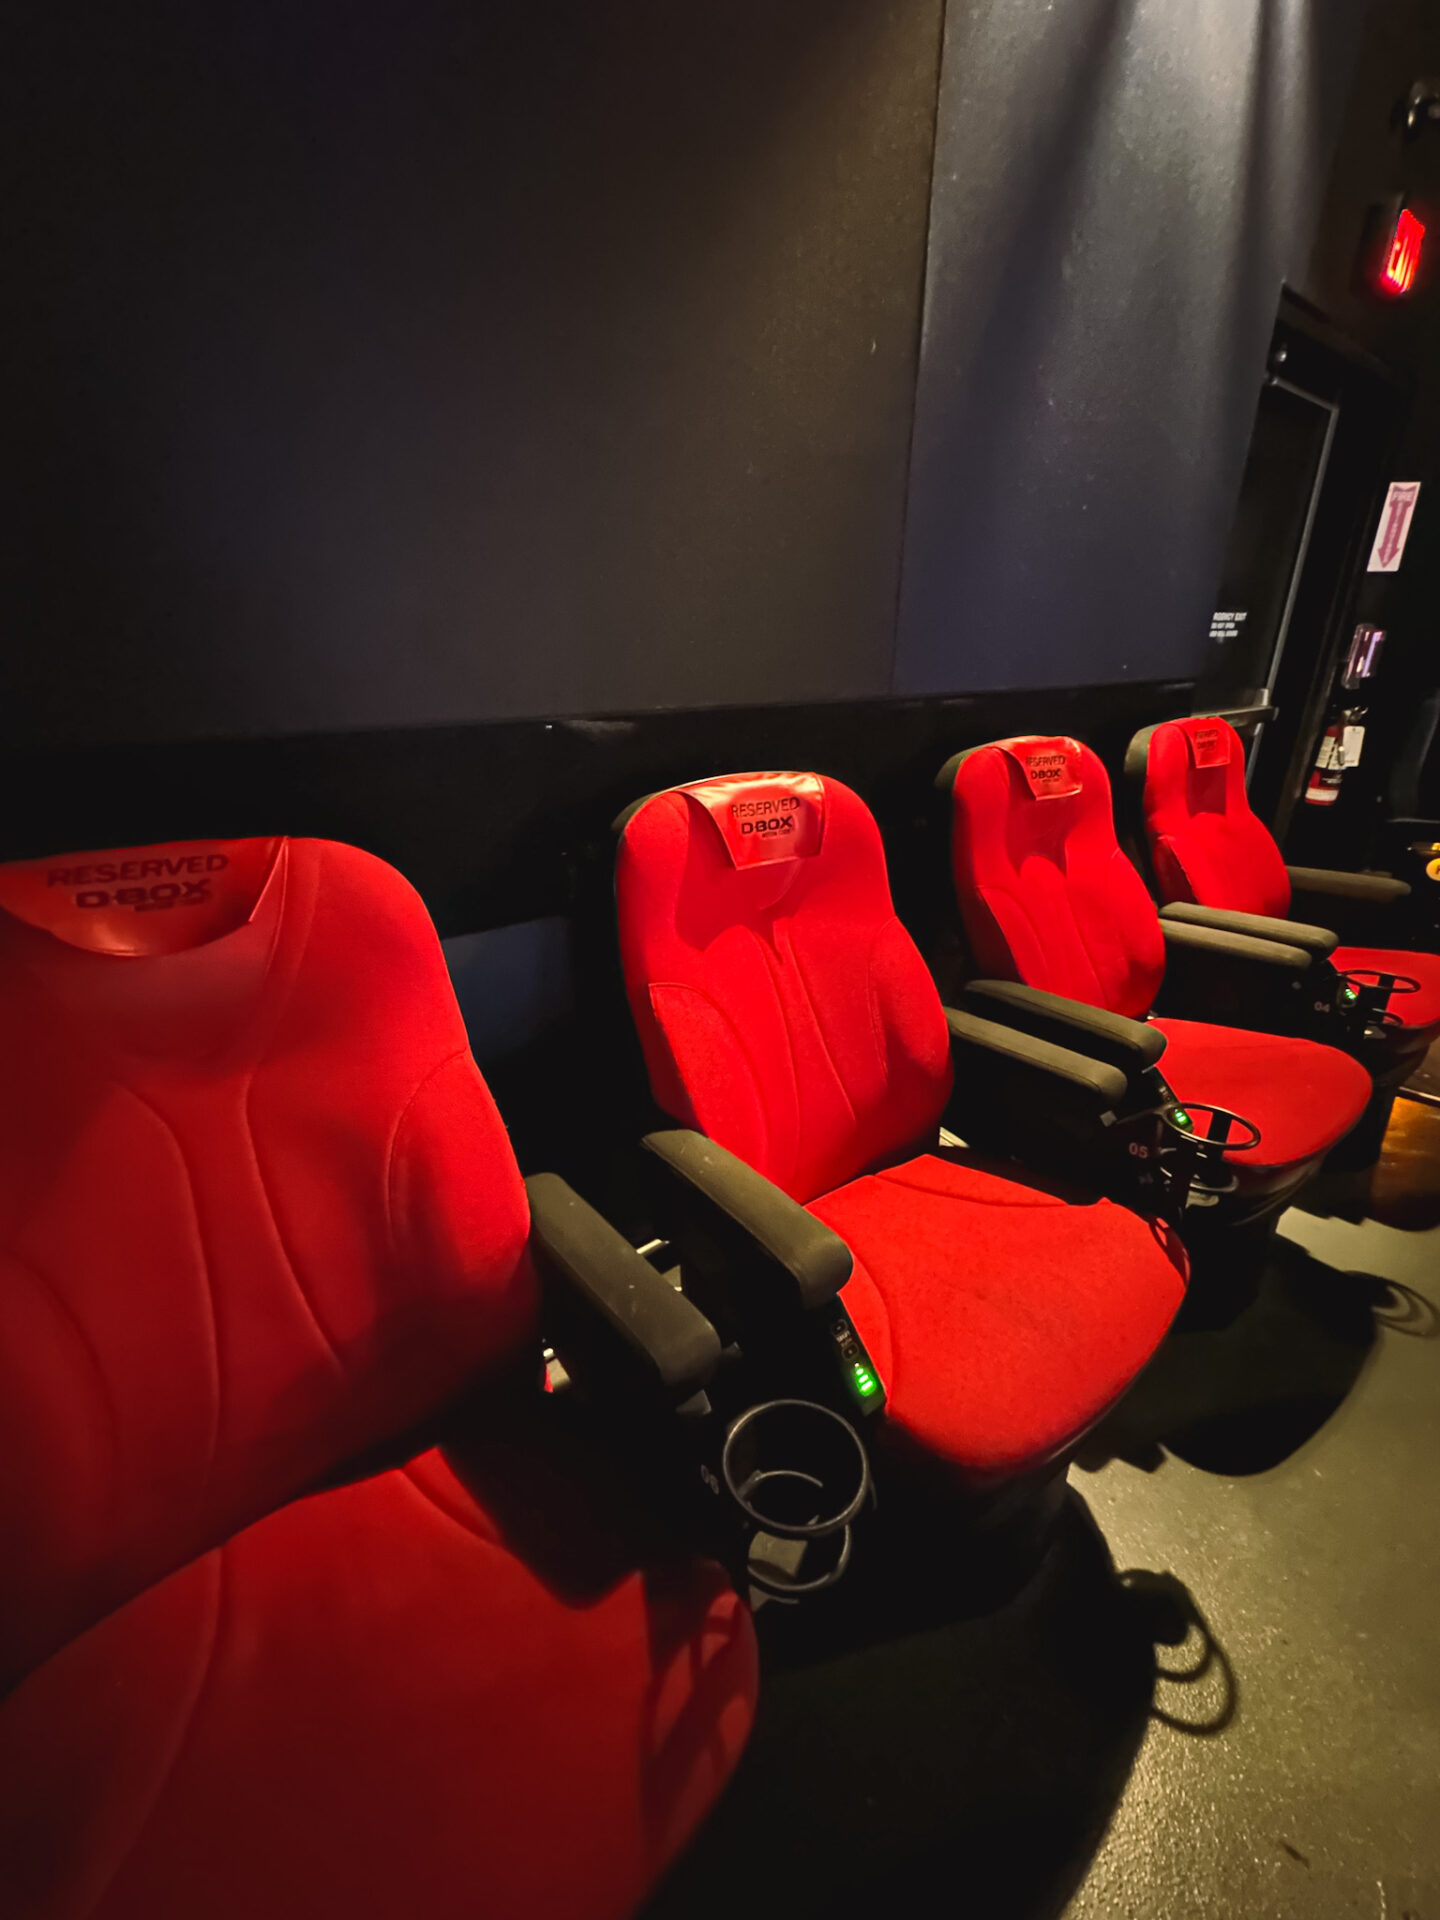 D-Box seats at Cineplex Cinemas Markham and VIP in Downtown Markham, Ontario